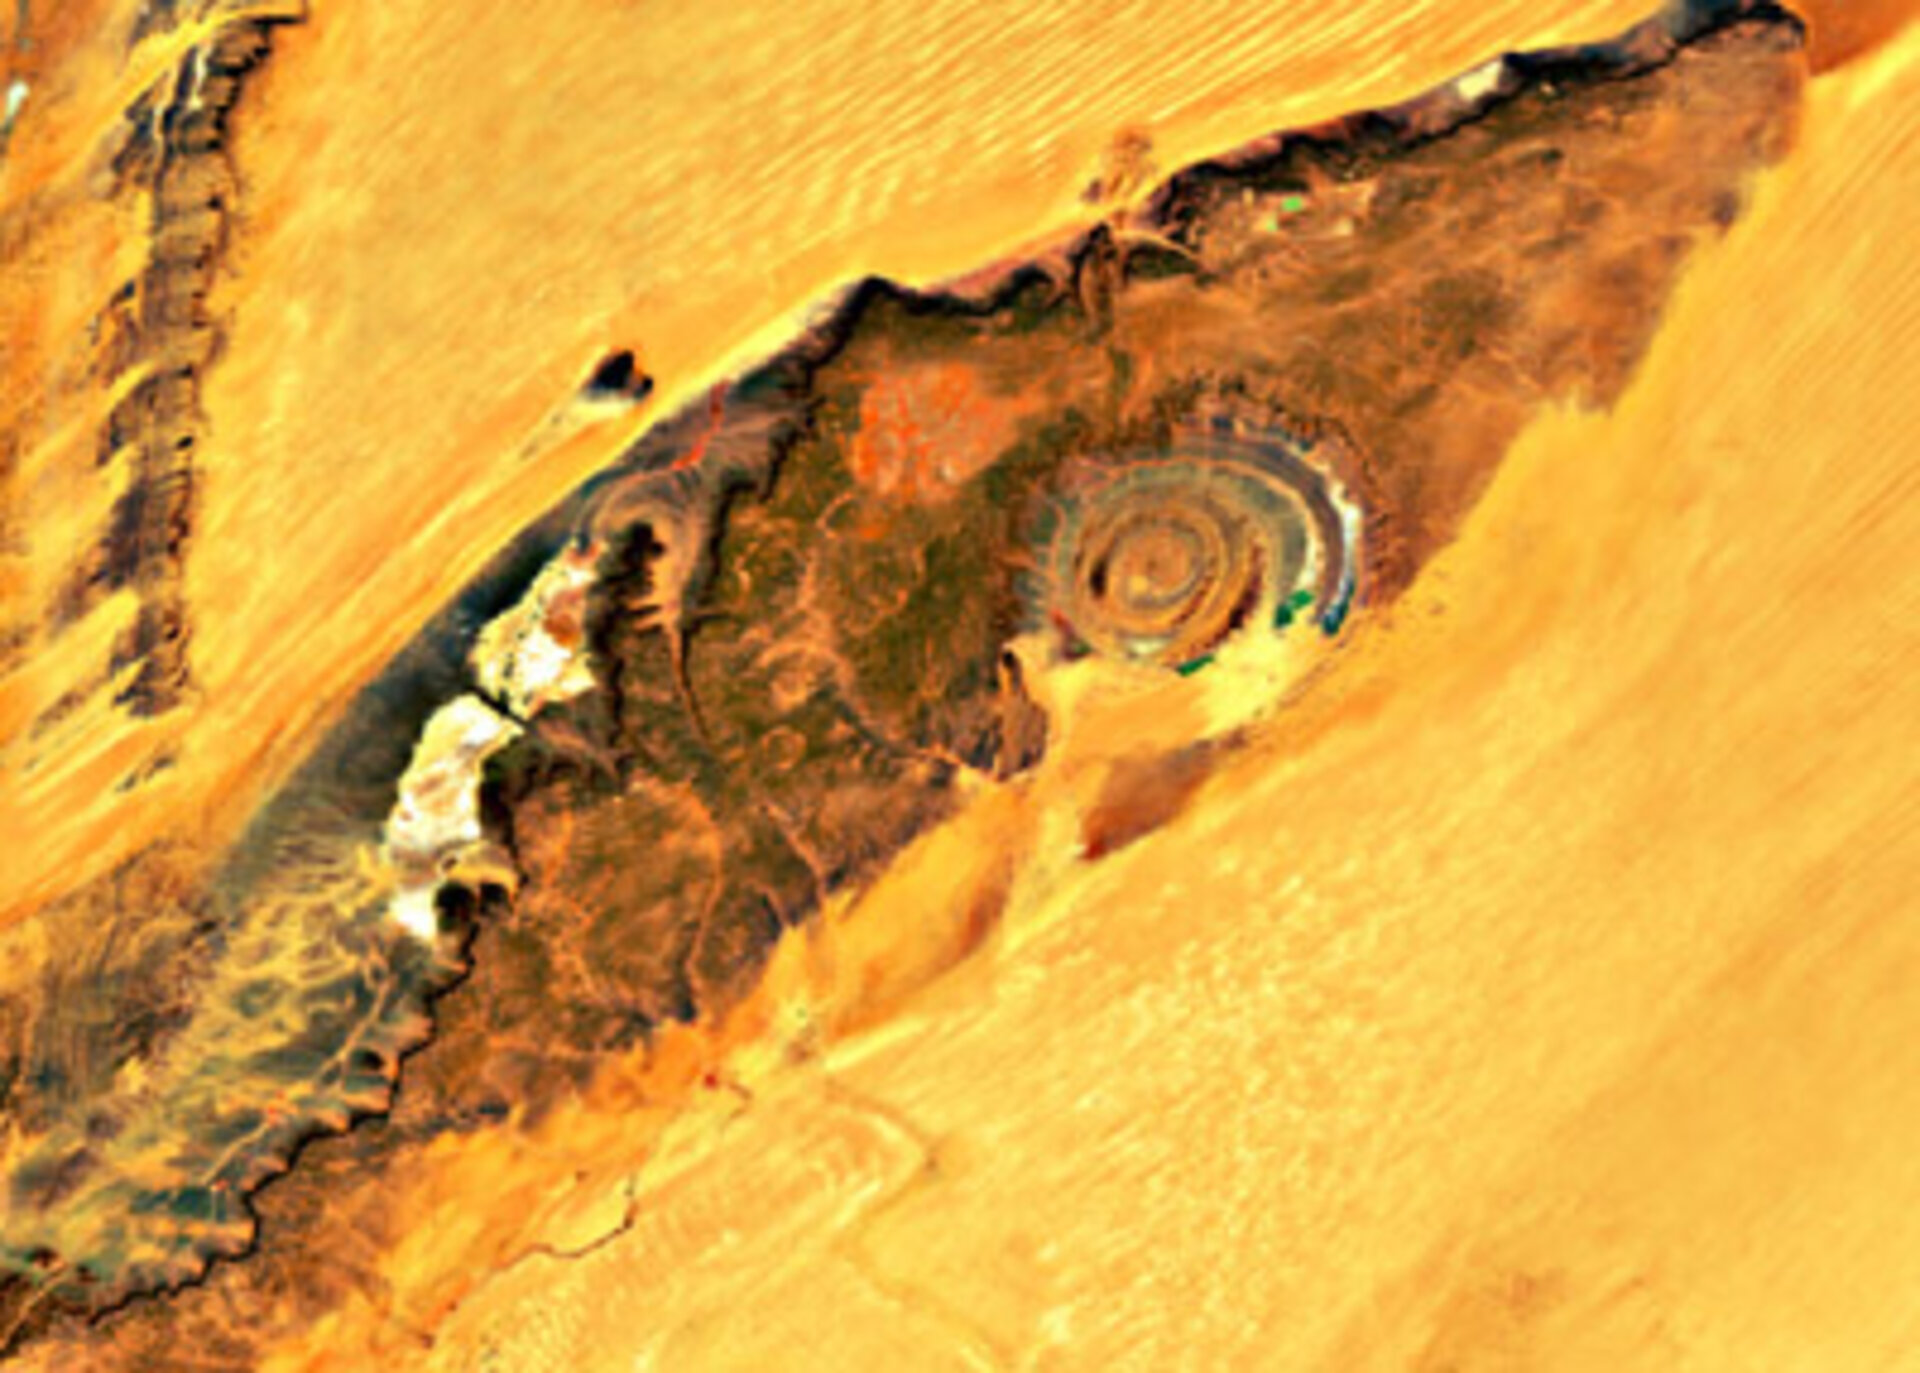 Close-up of the Richat structure